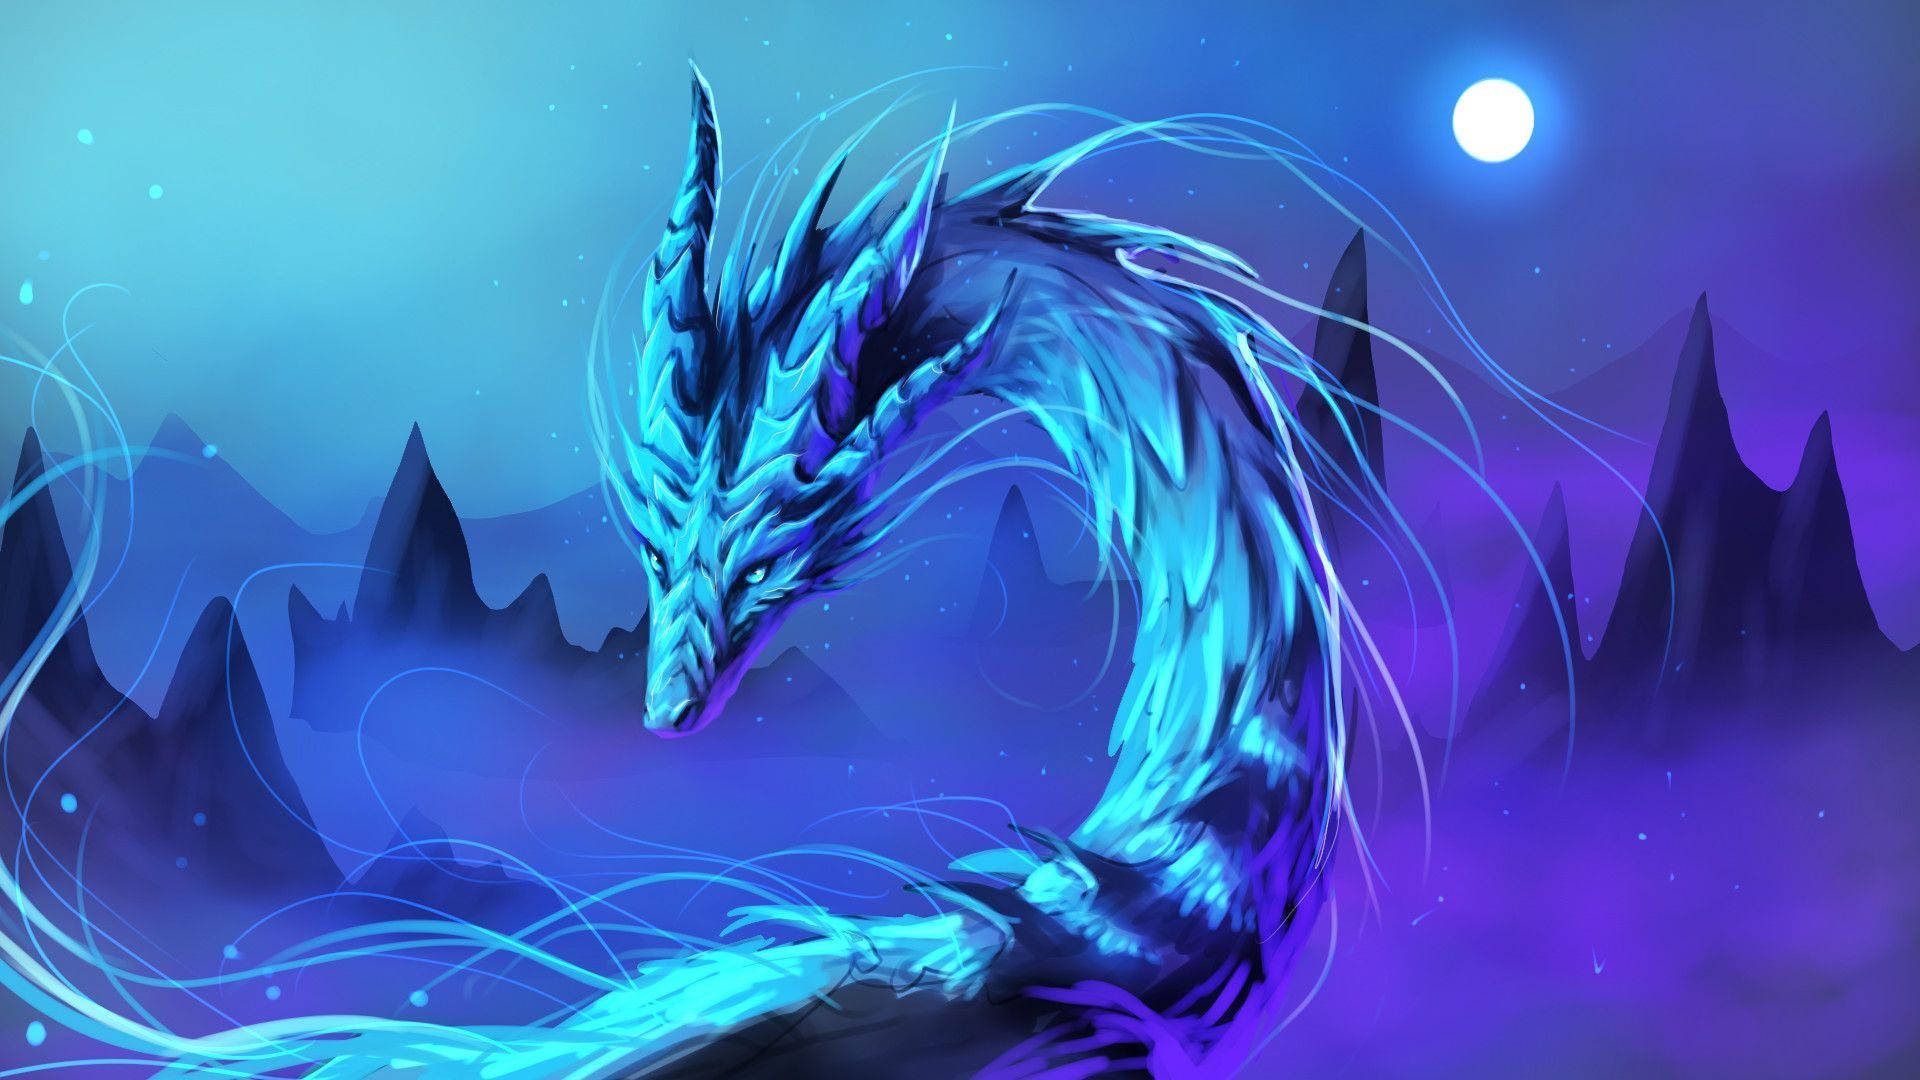 Take flight with the Coolest Dragon Wallpaper